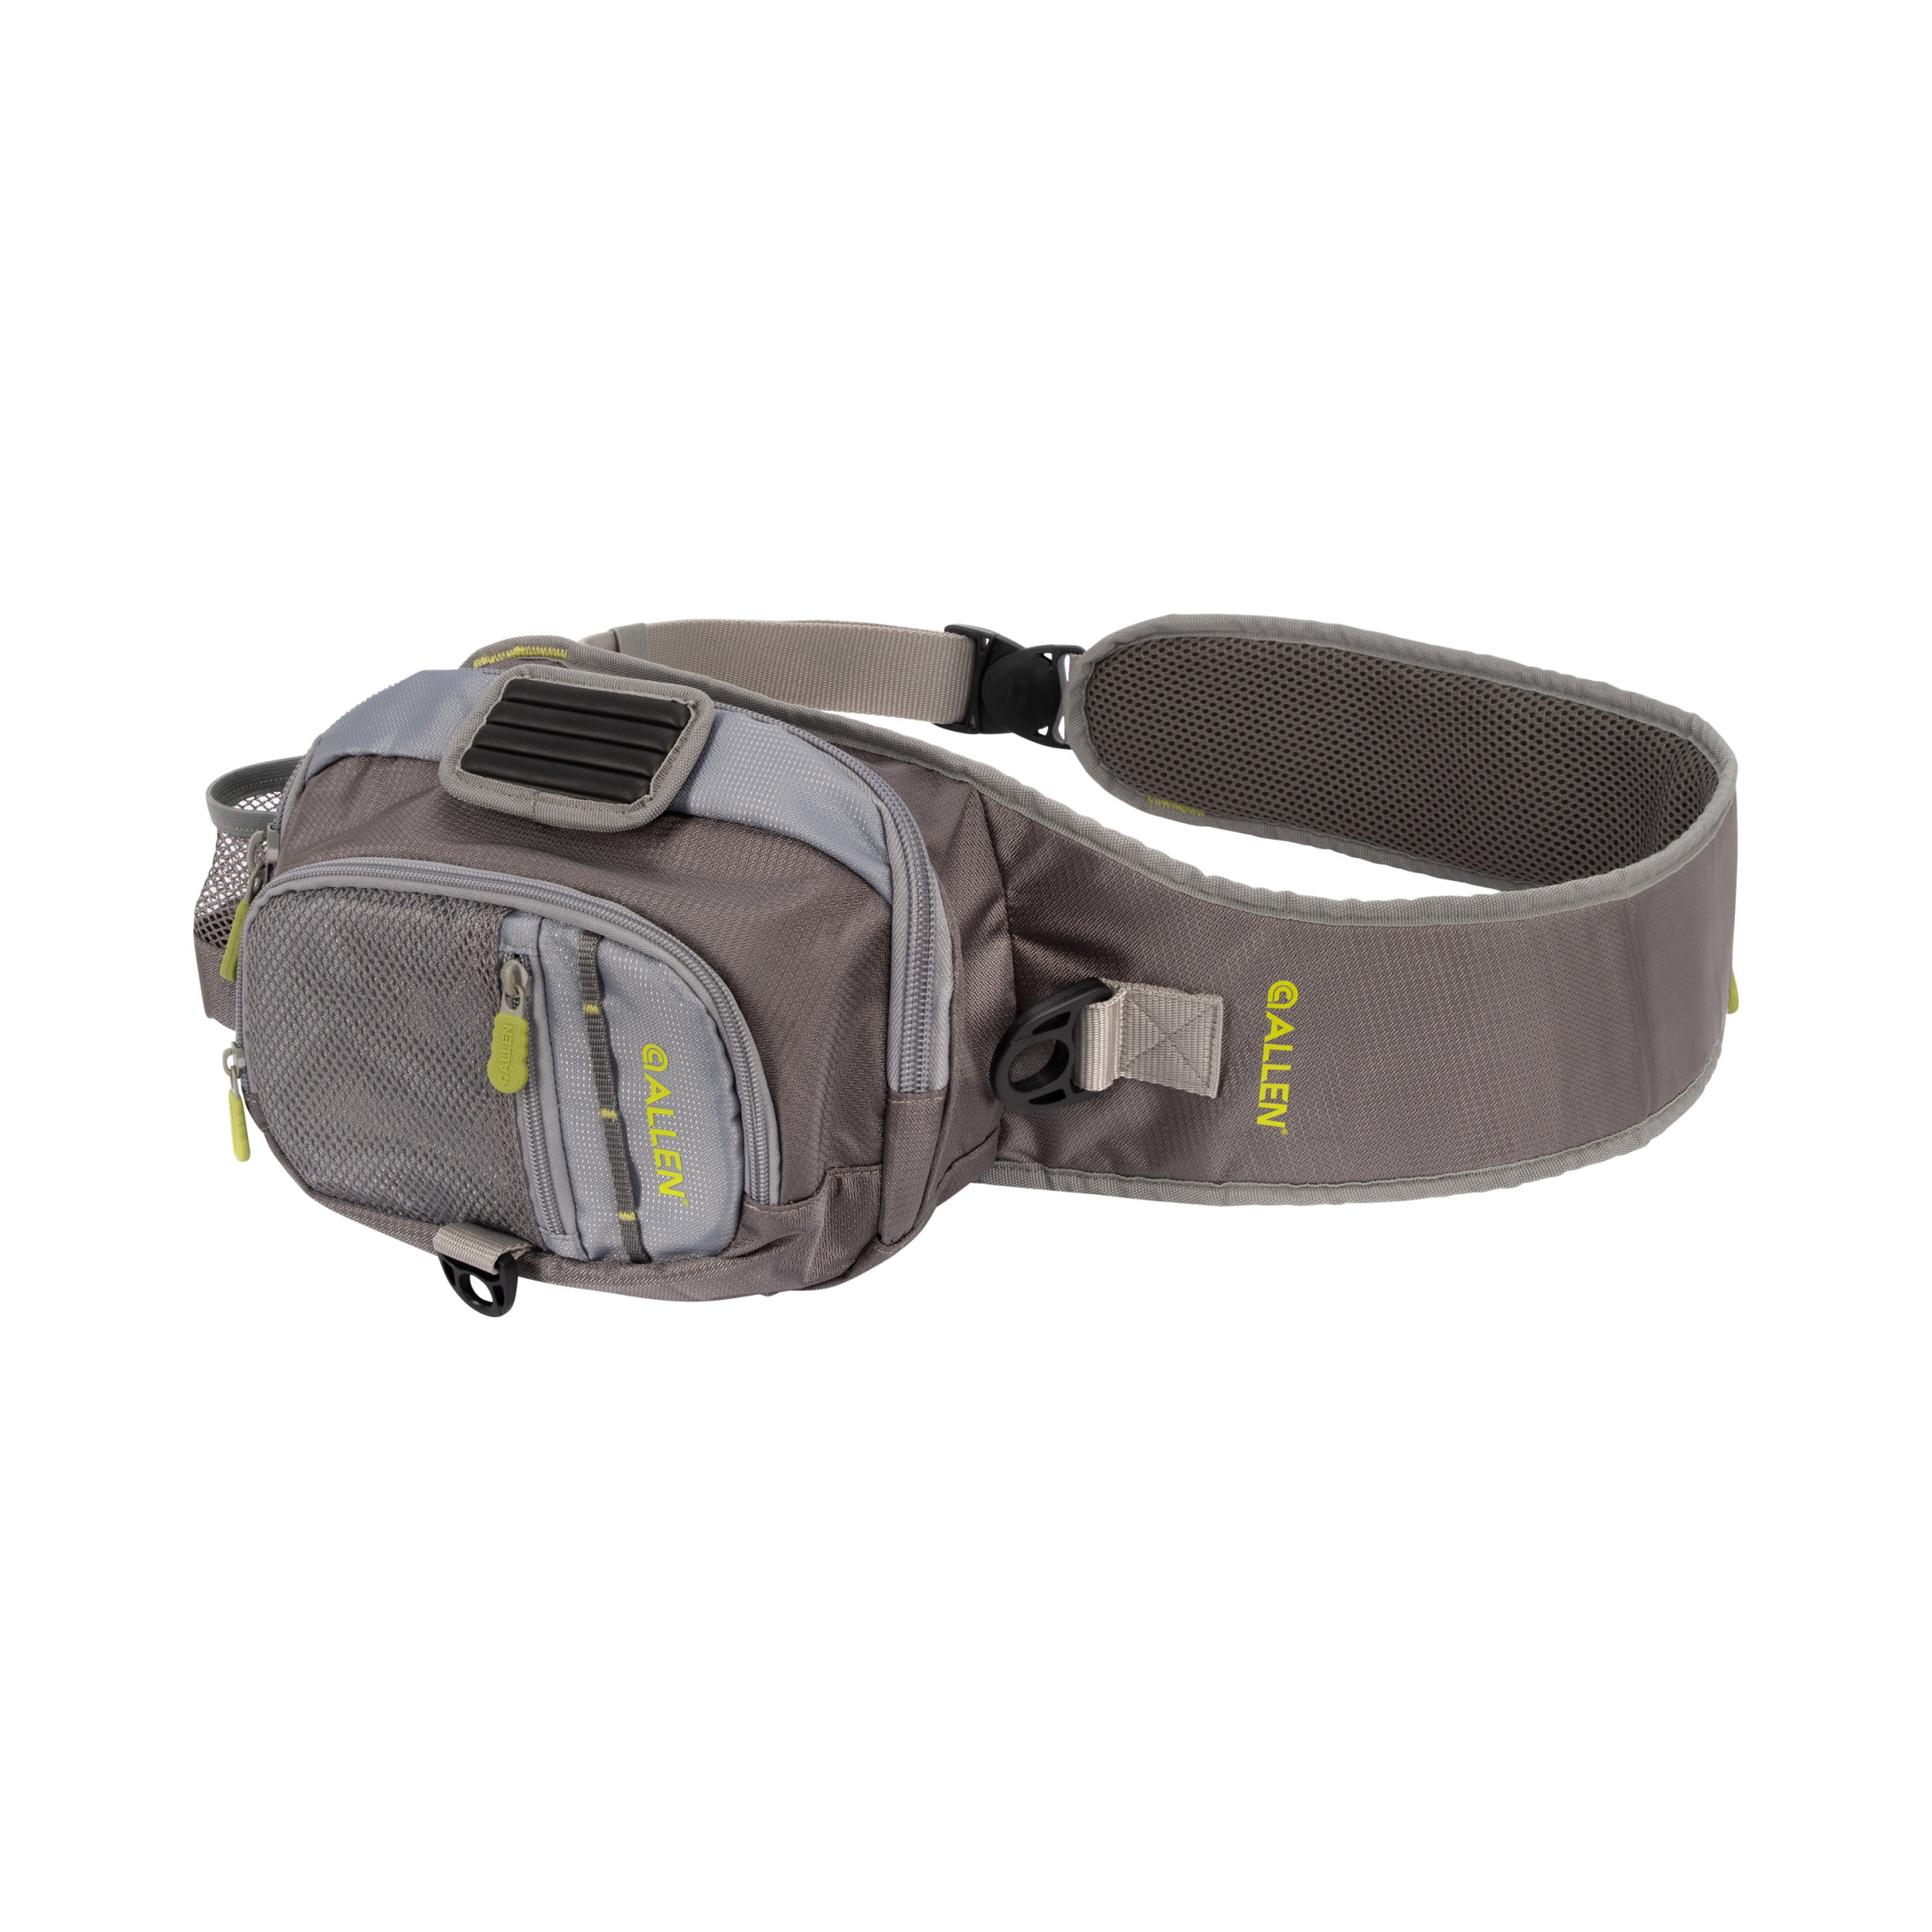 Allen Company Cedar Creek Fly Fishing Sling Pack, Fits up to 4